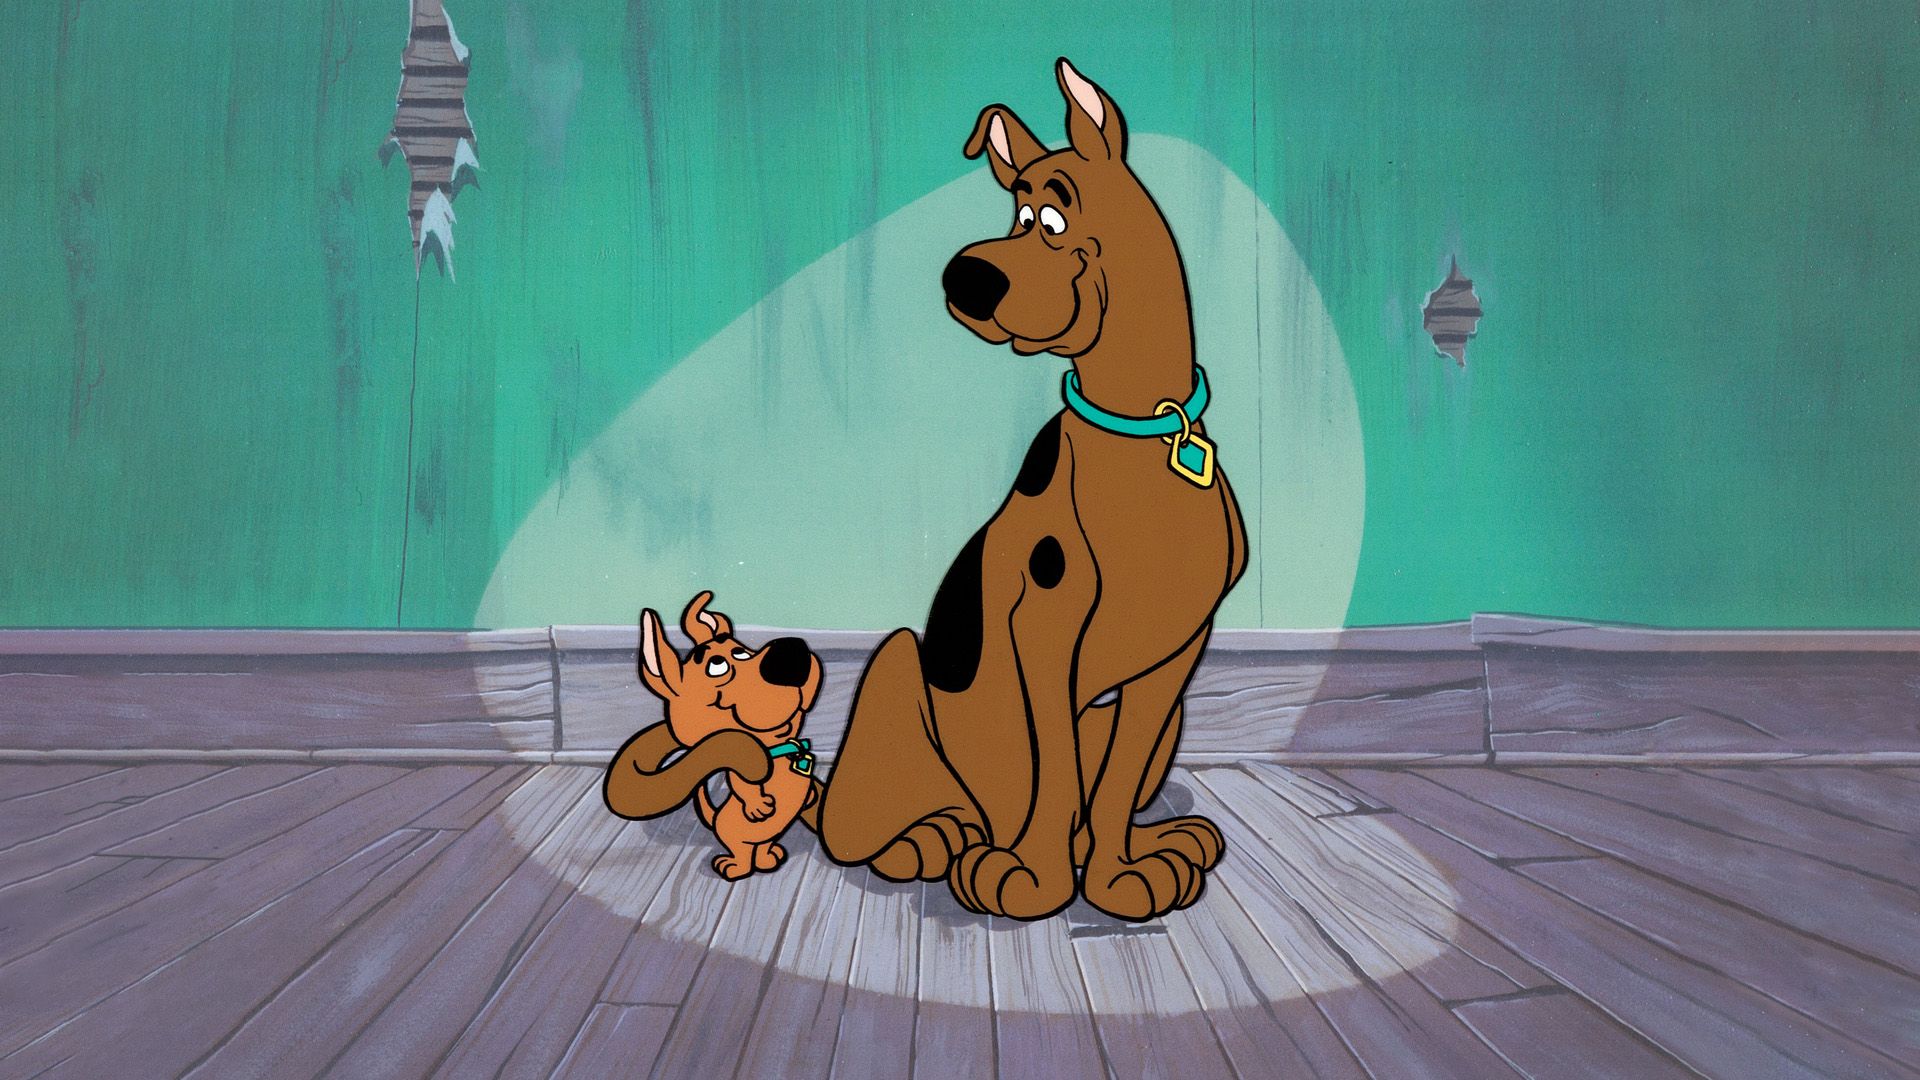 Scooby-Doo and Scrappy-Doo background